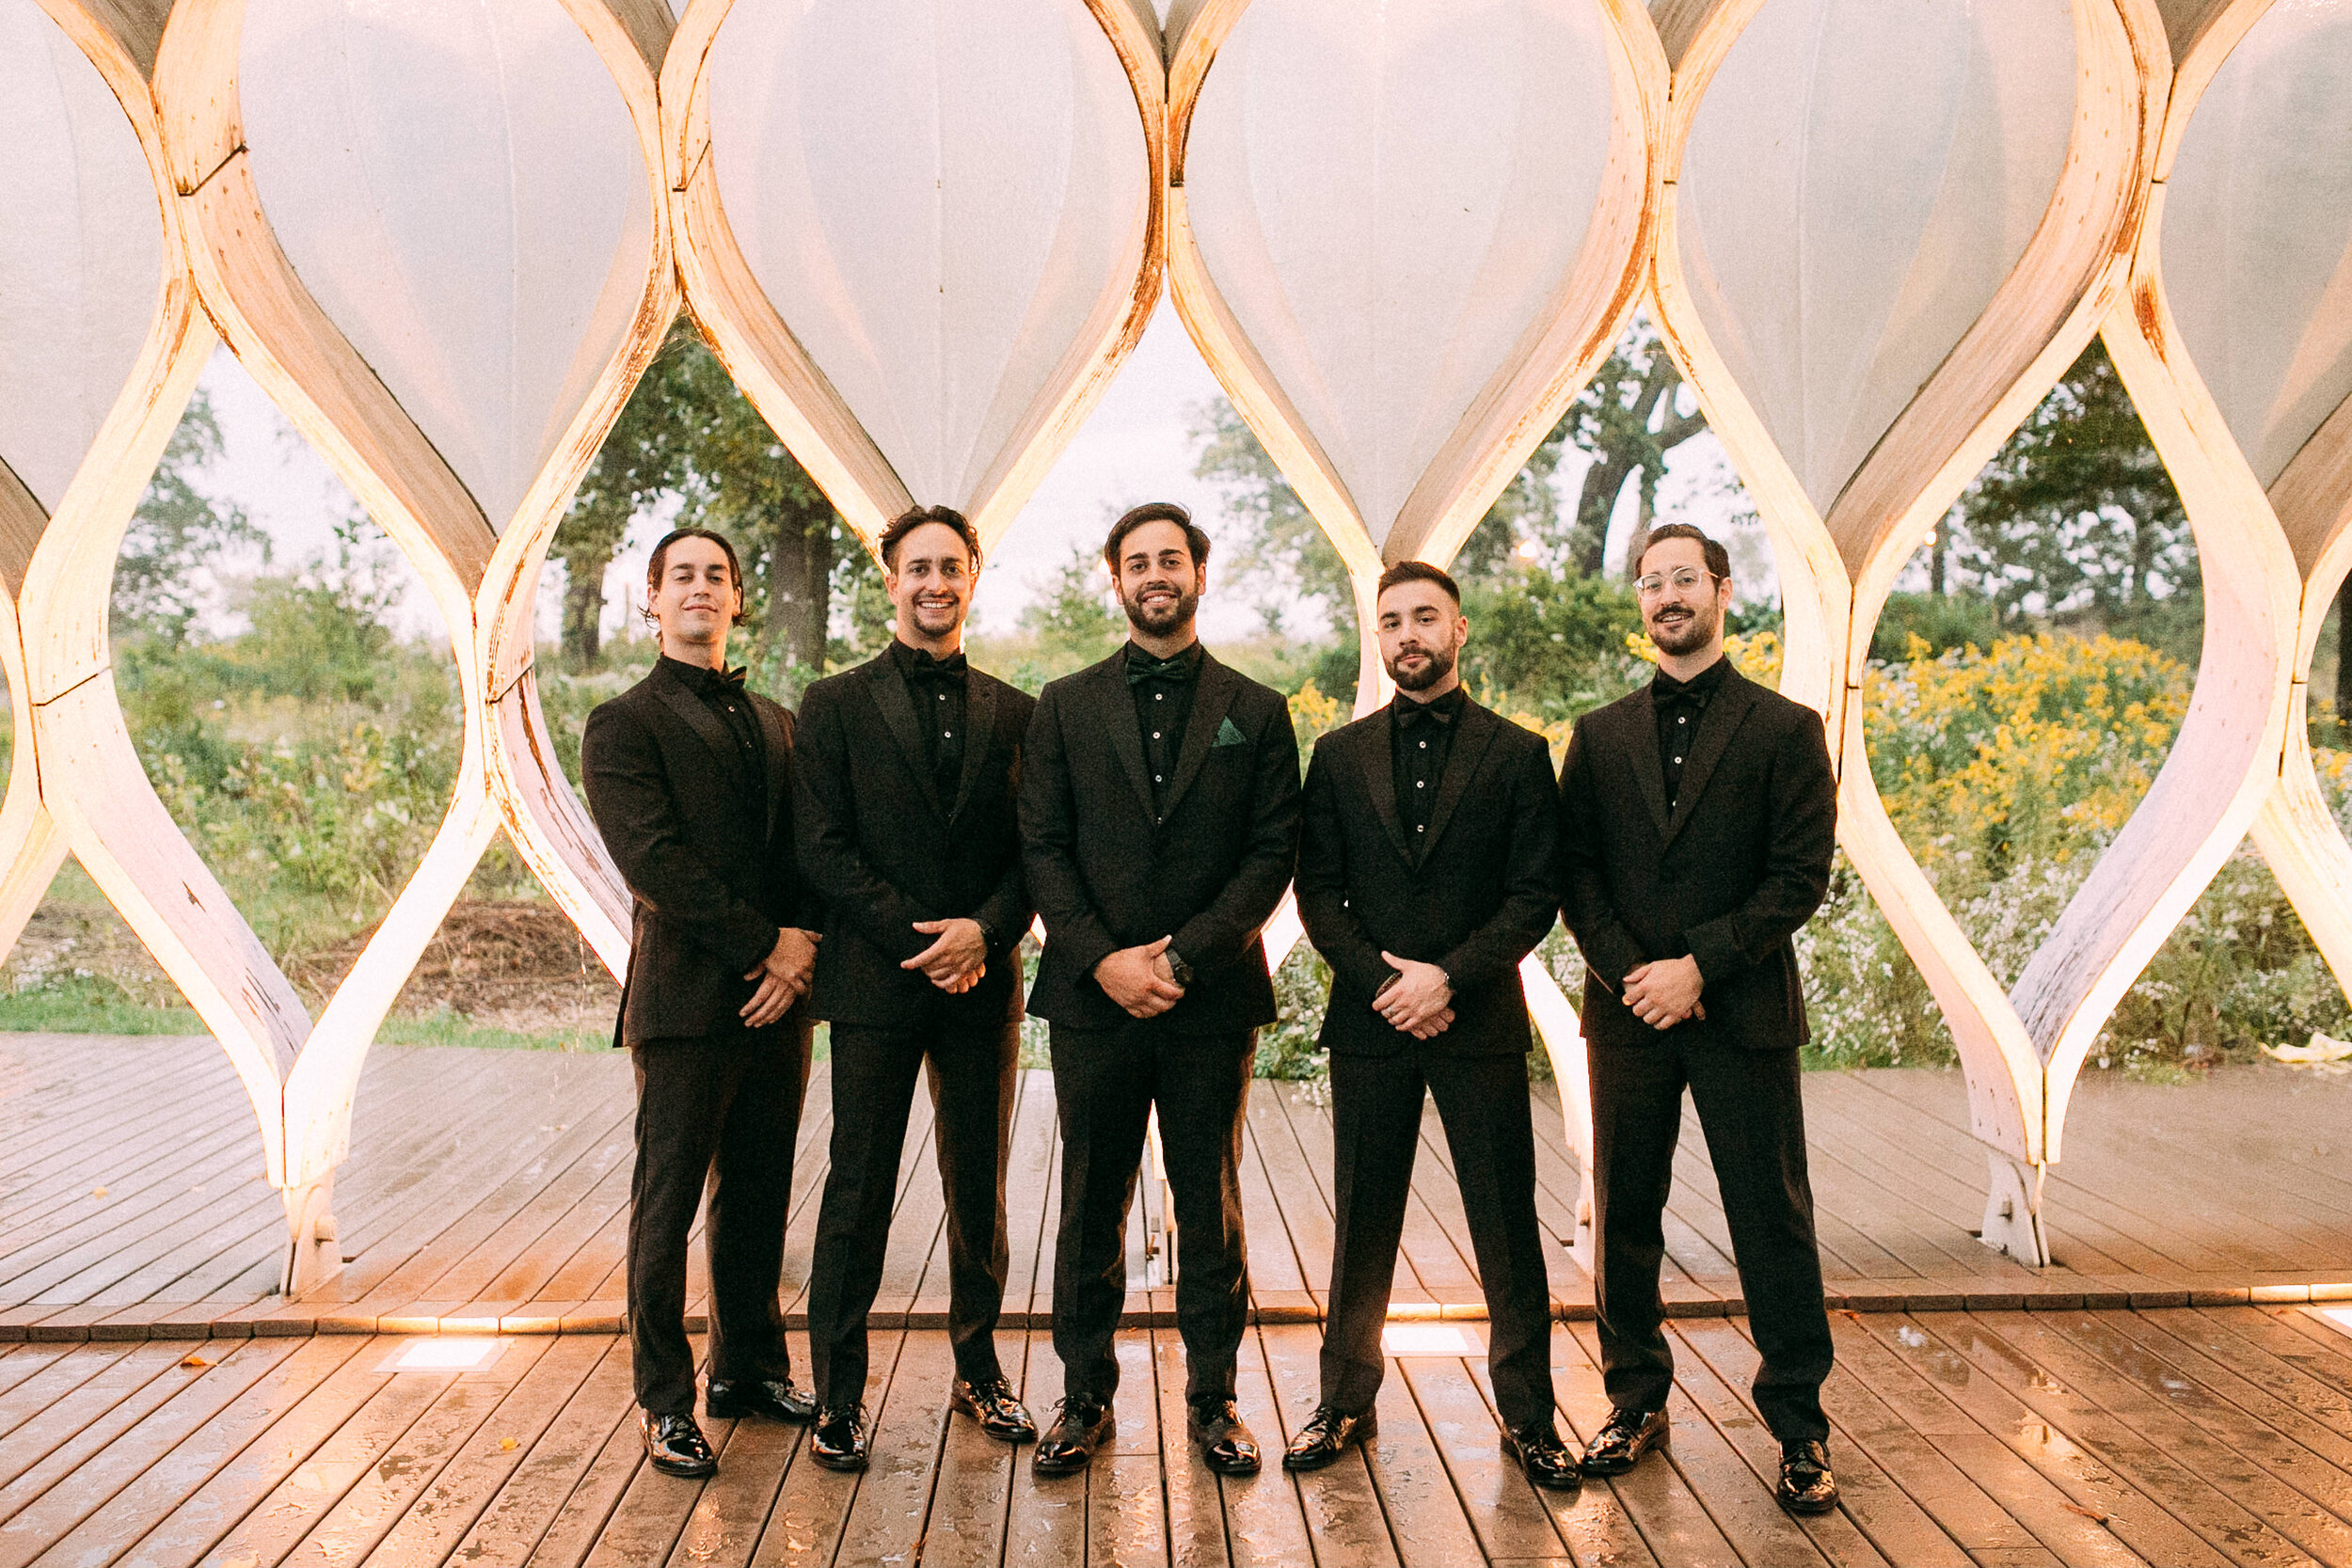 Groomsmen wedding photography: Modern Chicago wedding at Ovation captured by This Is Feeling Photography. Find more Chicago wedding inspiration at CHItheeWED.com!